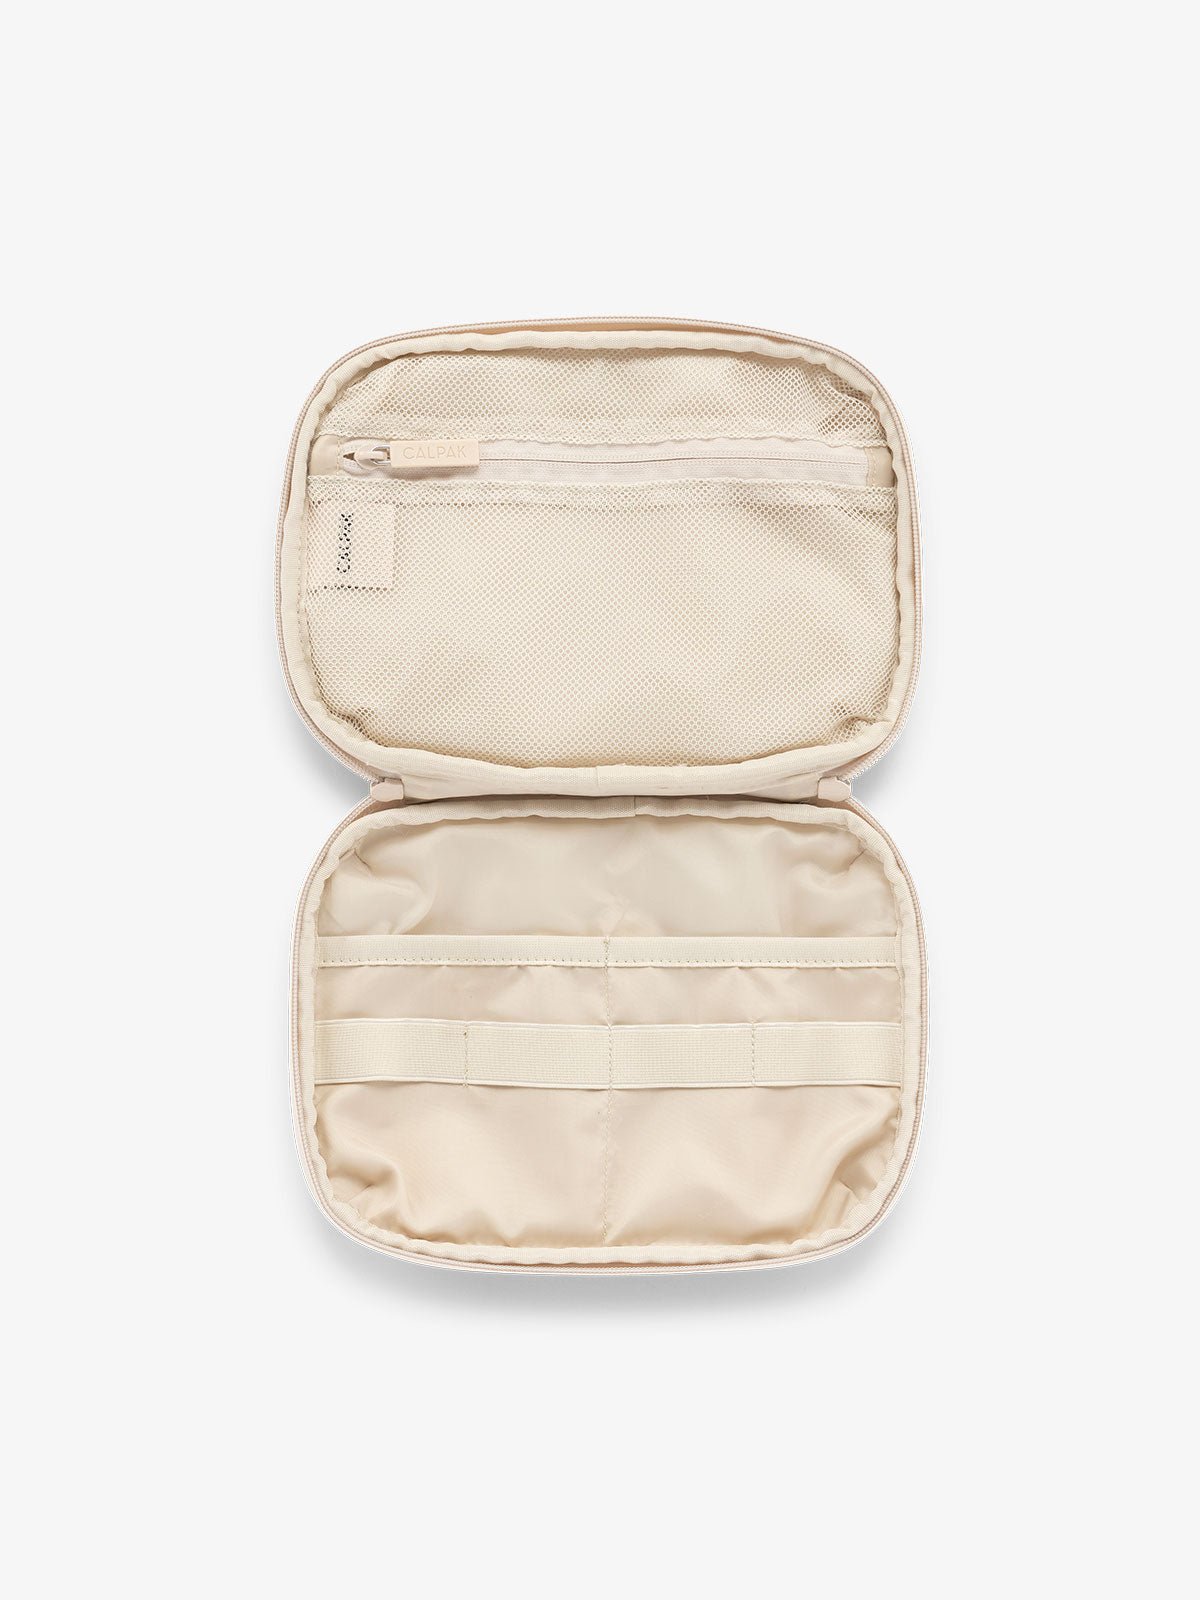 CALPAK tech and electronics organizer for travel in beige speckle